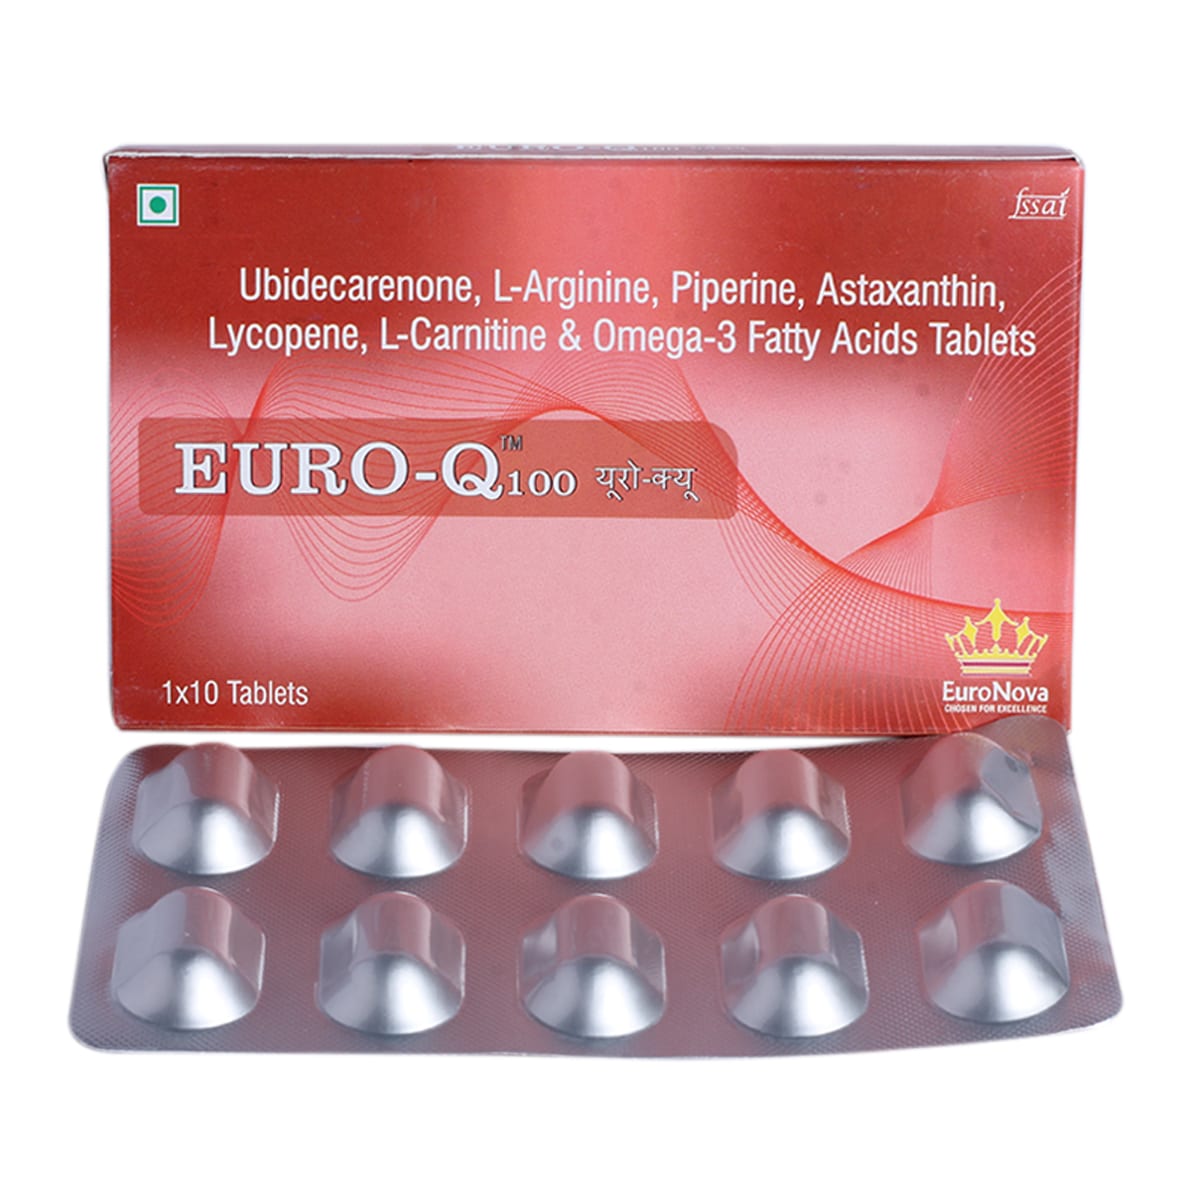 Euro-Q 100 Tablet 10's, Pack of 10 S